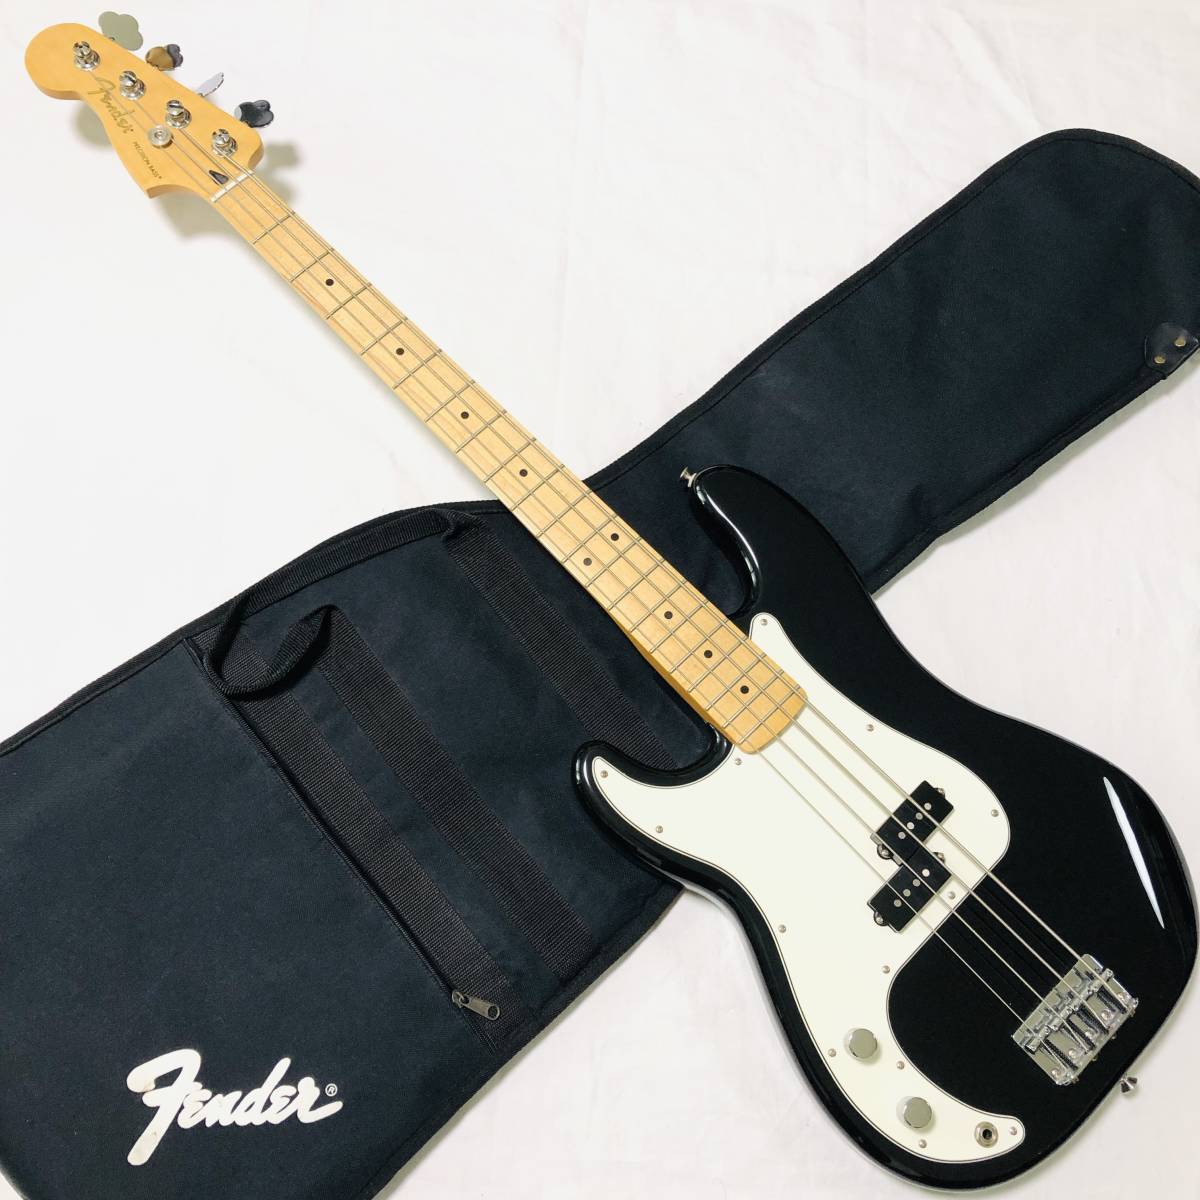 Fender Precision Bass LH MADE IN MEXICO Player series フェンダー プレシジョンベース 左利き レフティ Left Handed